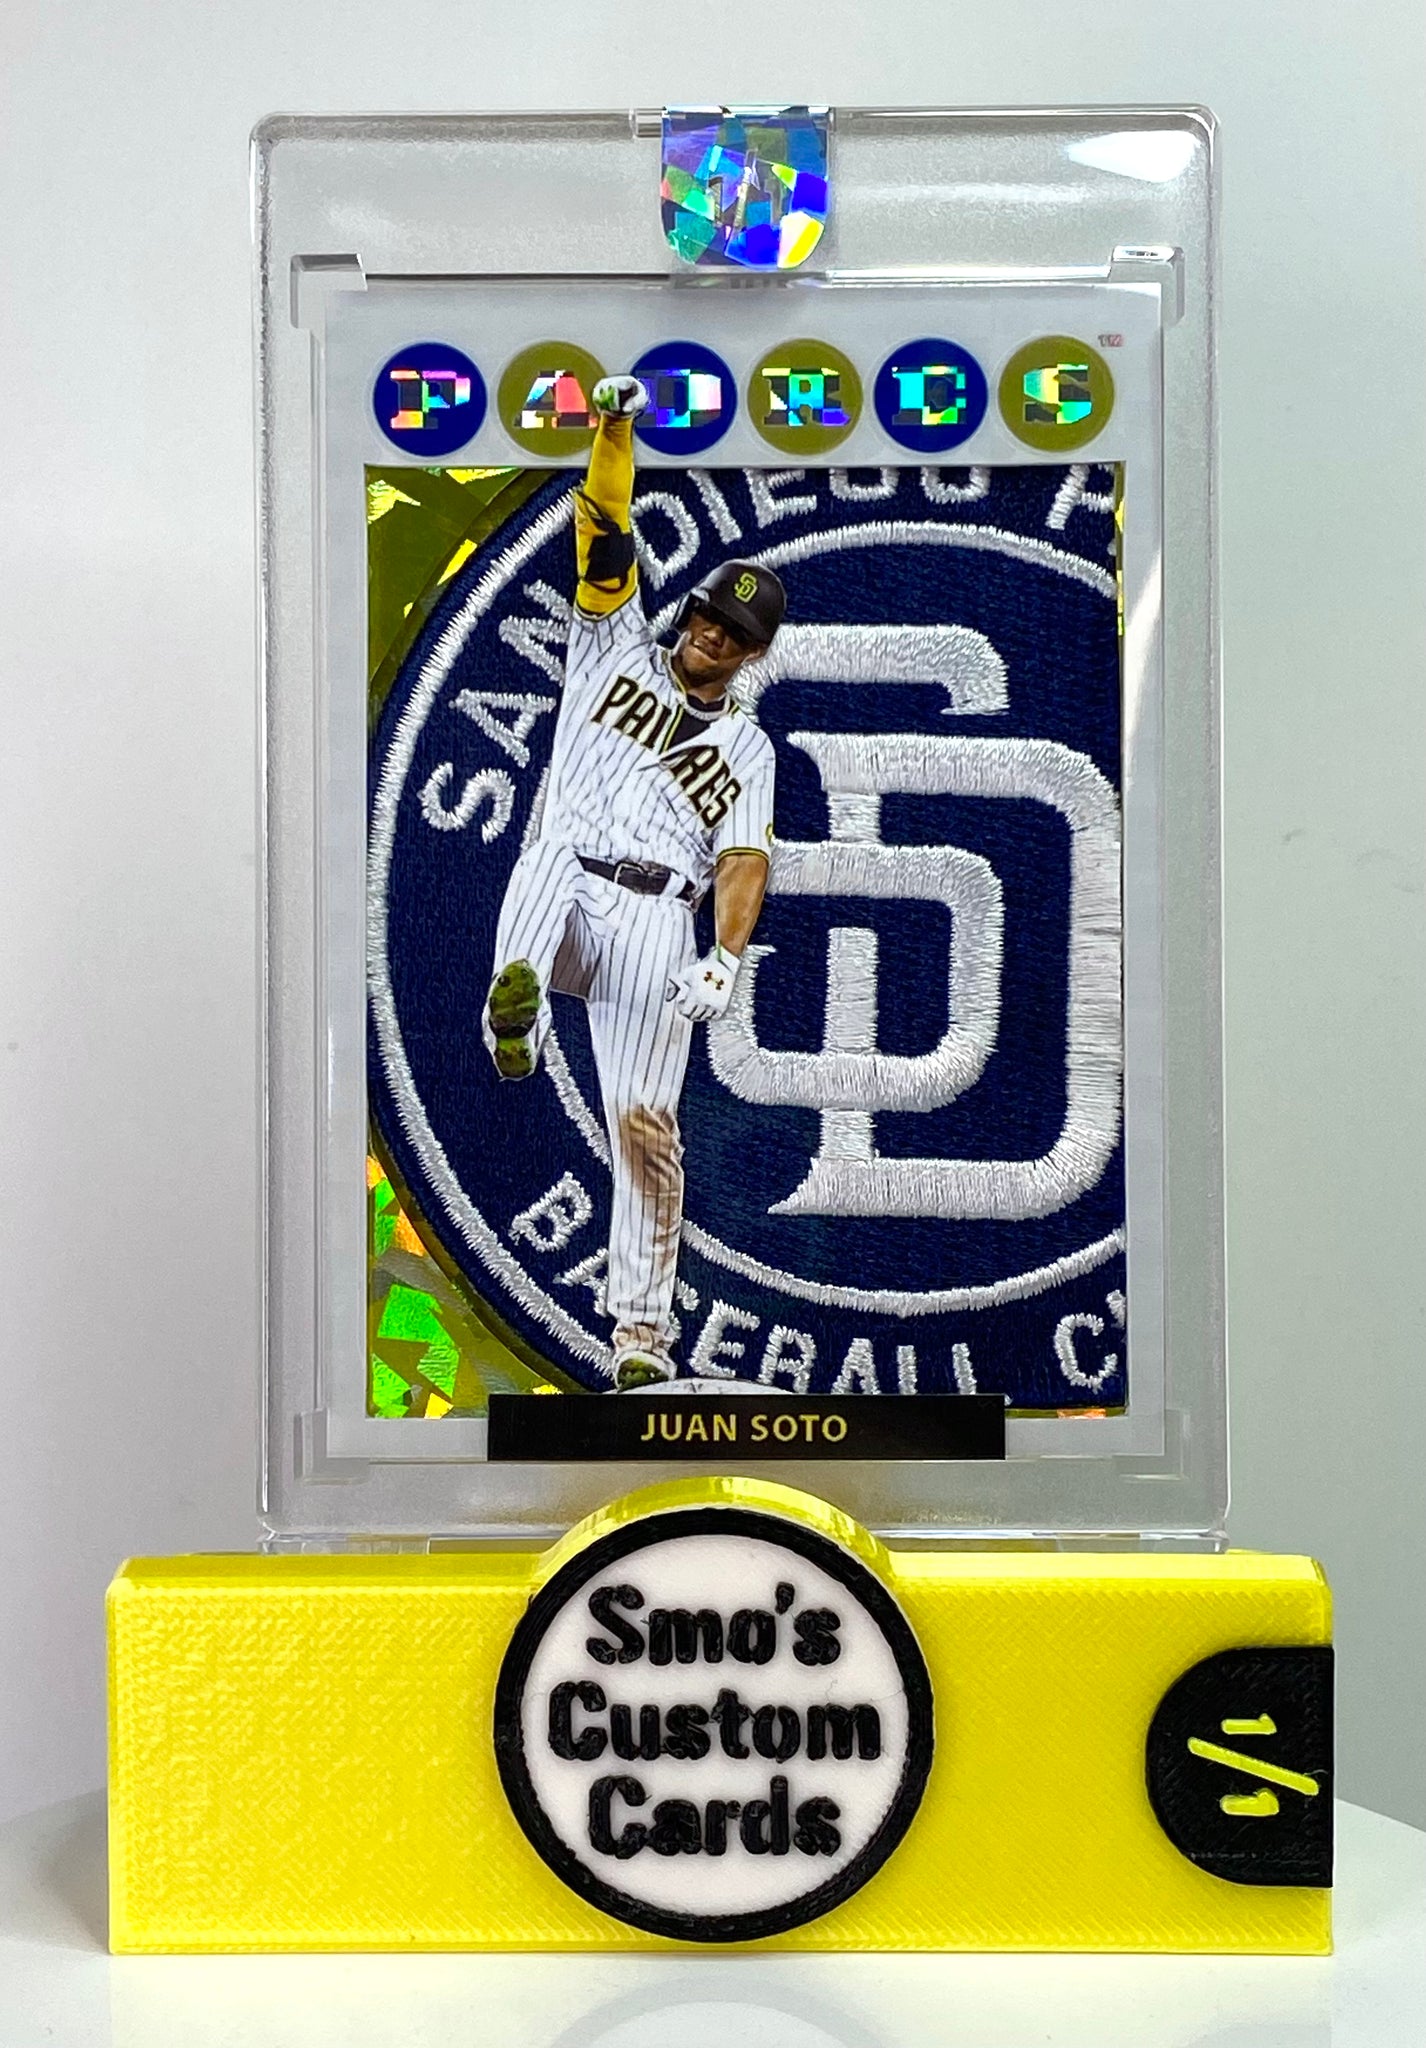 Juan Soto 2008 Topps Chrome Xfractor Padres Patch 1/1